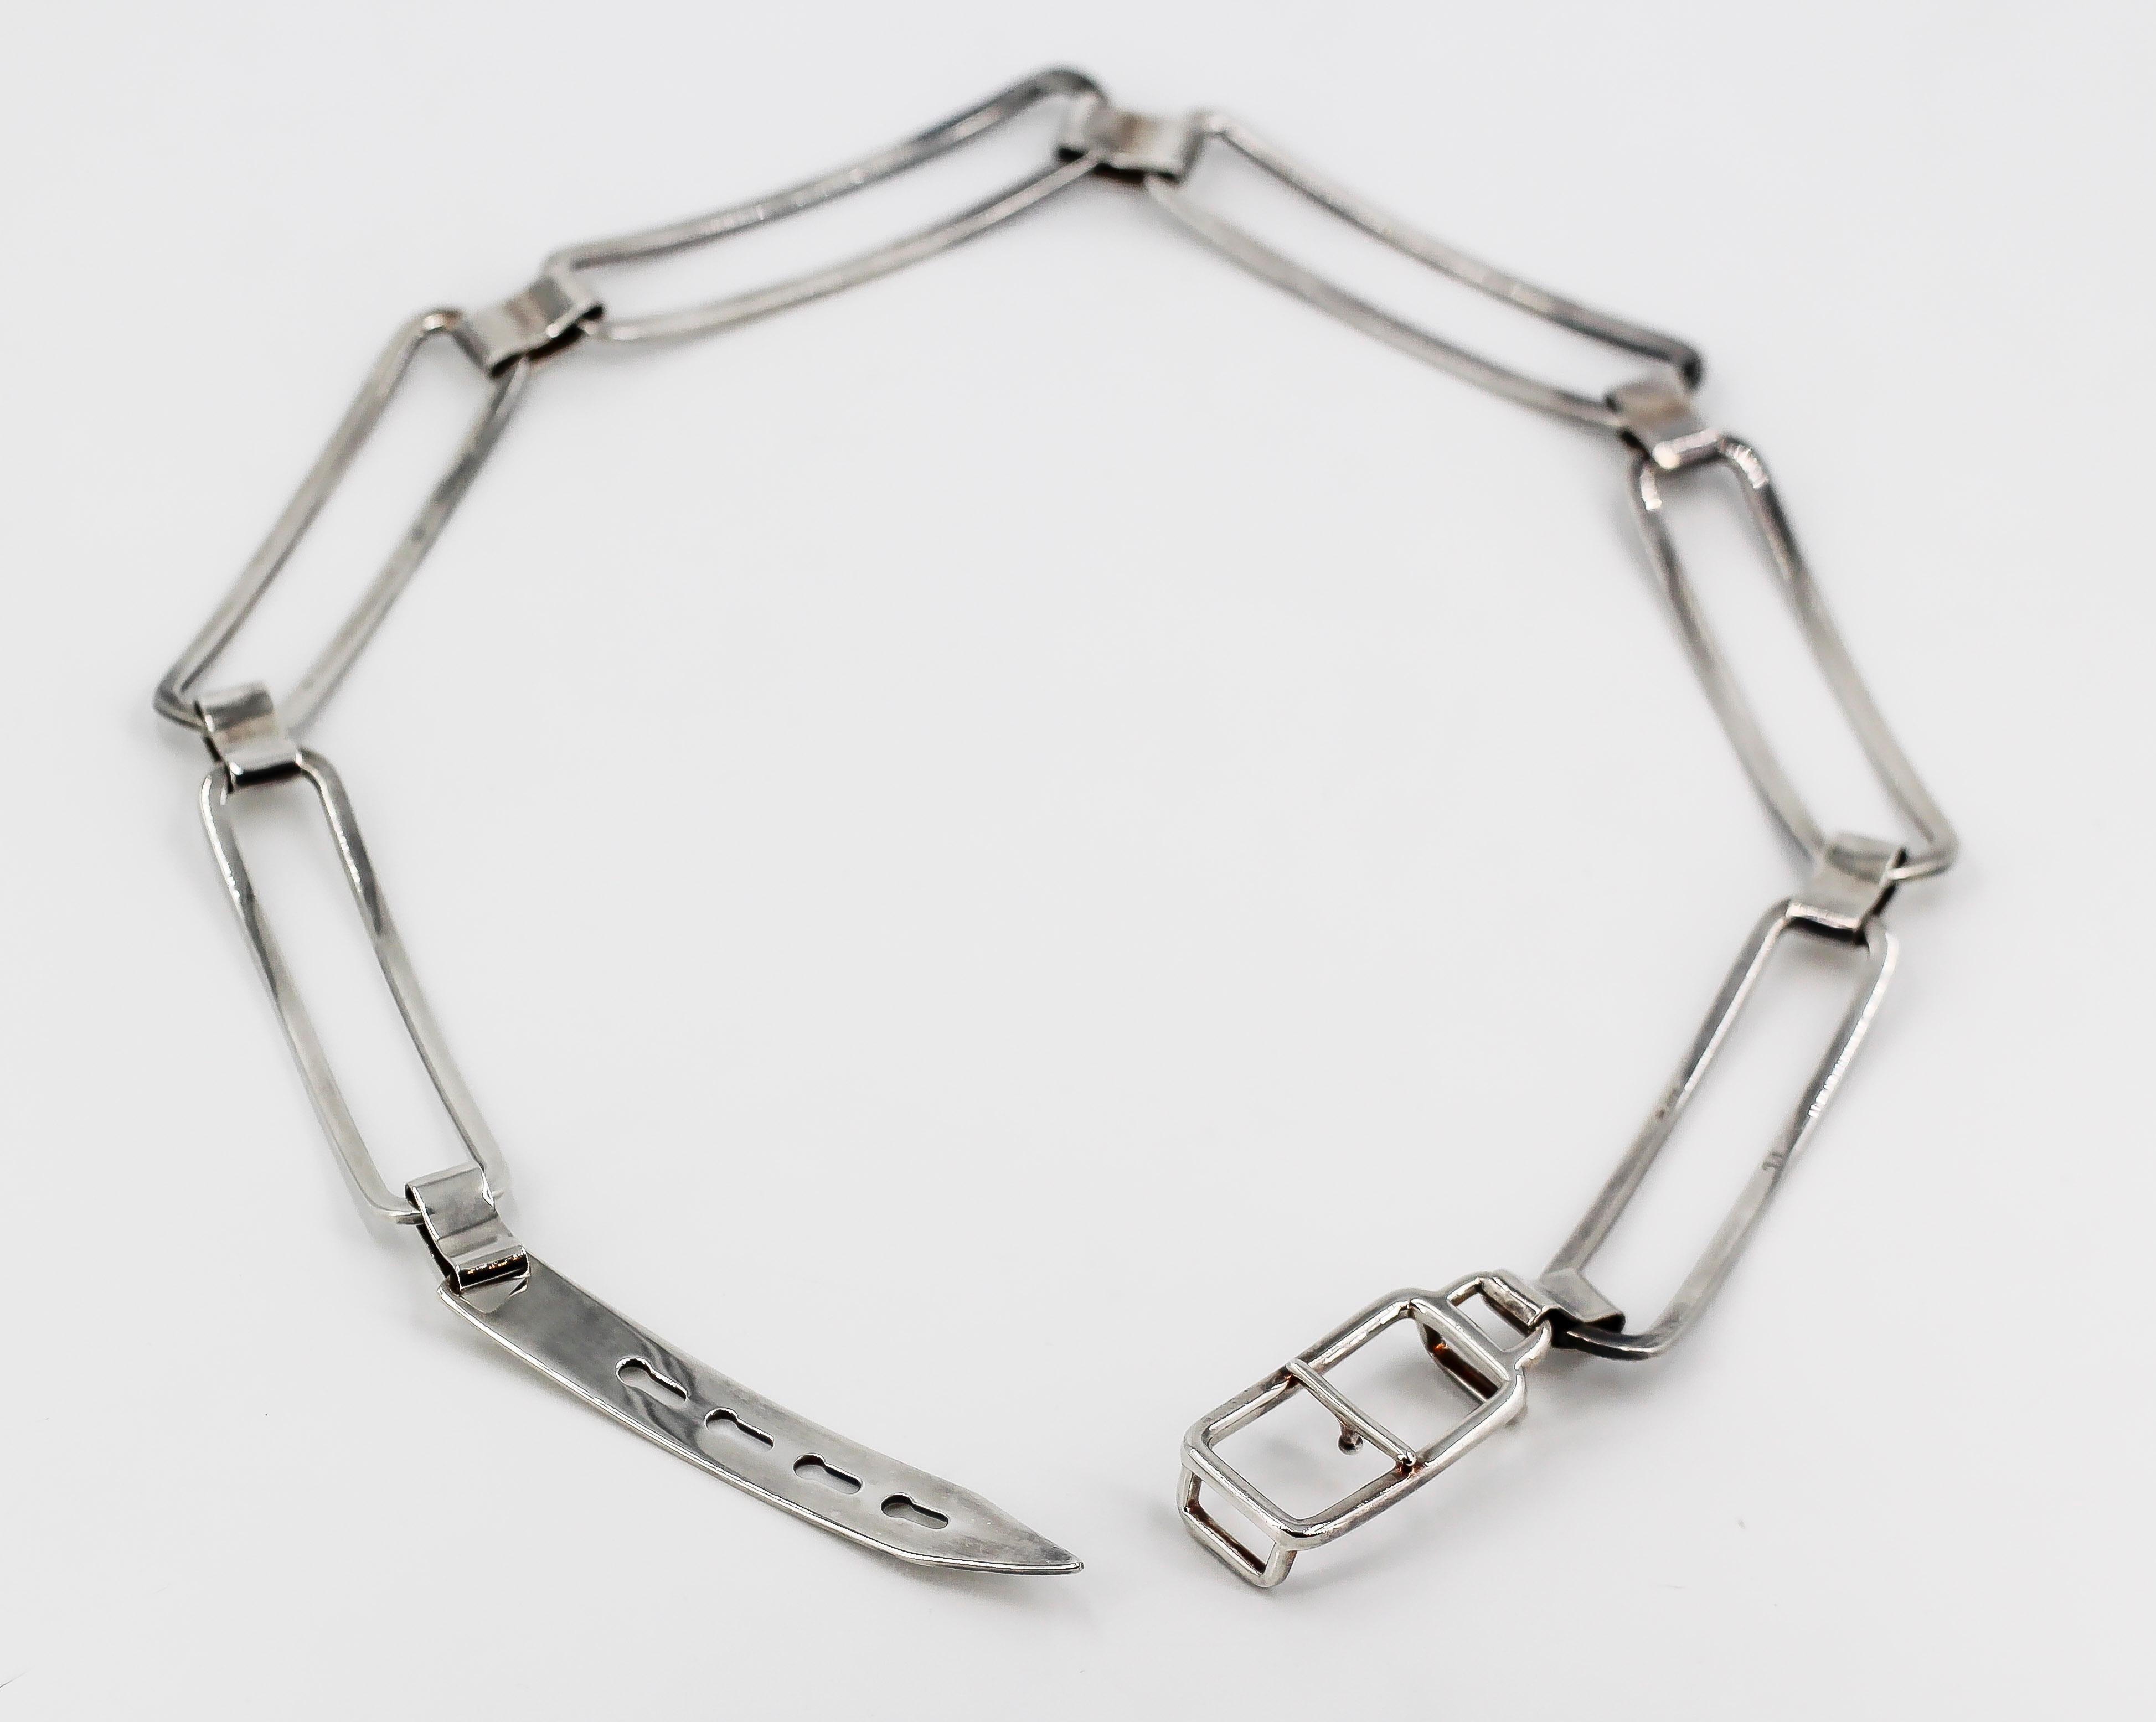 Highly fashionable sterling silver belt by Ralph Lauren, circa 1970s. It features an adjustable length. Total length 32.5